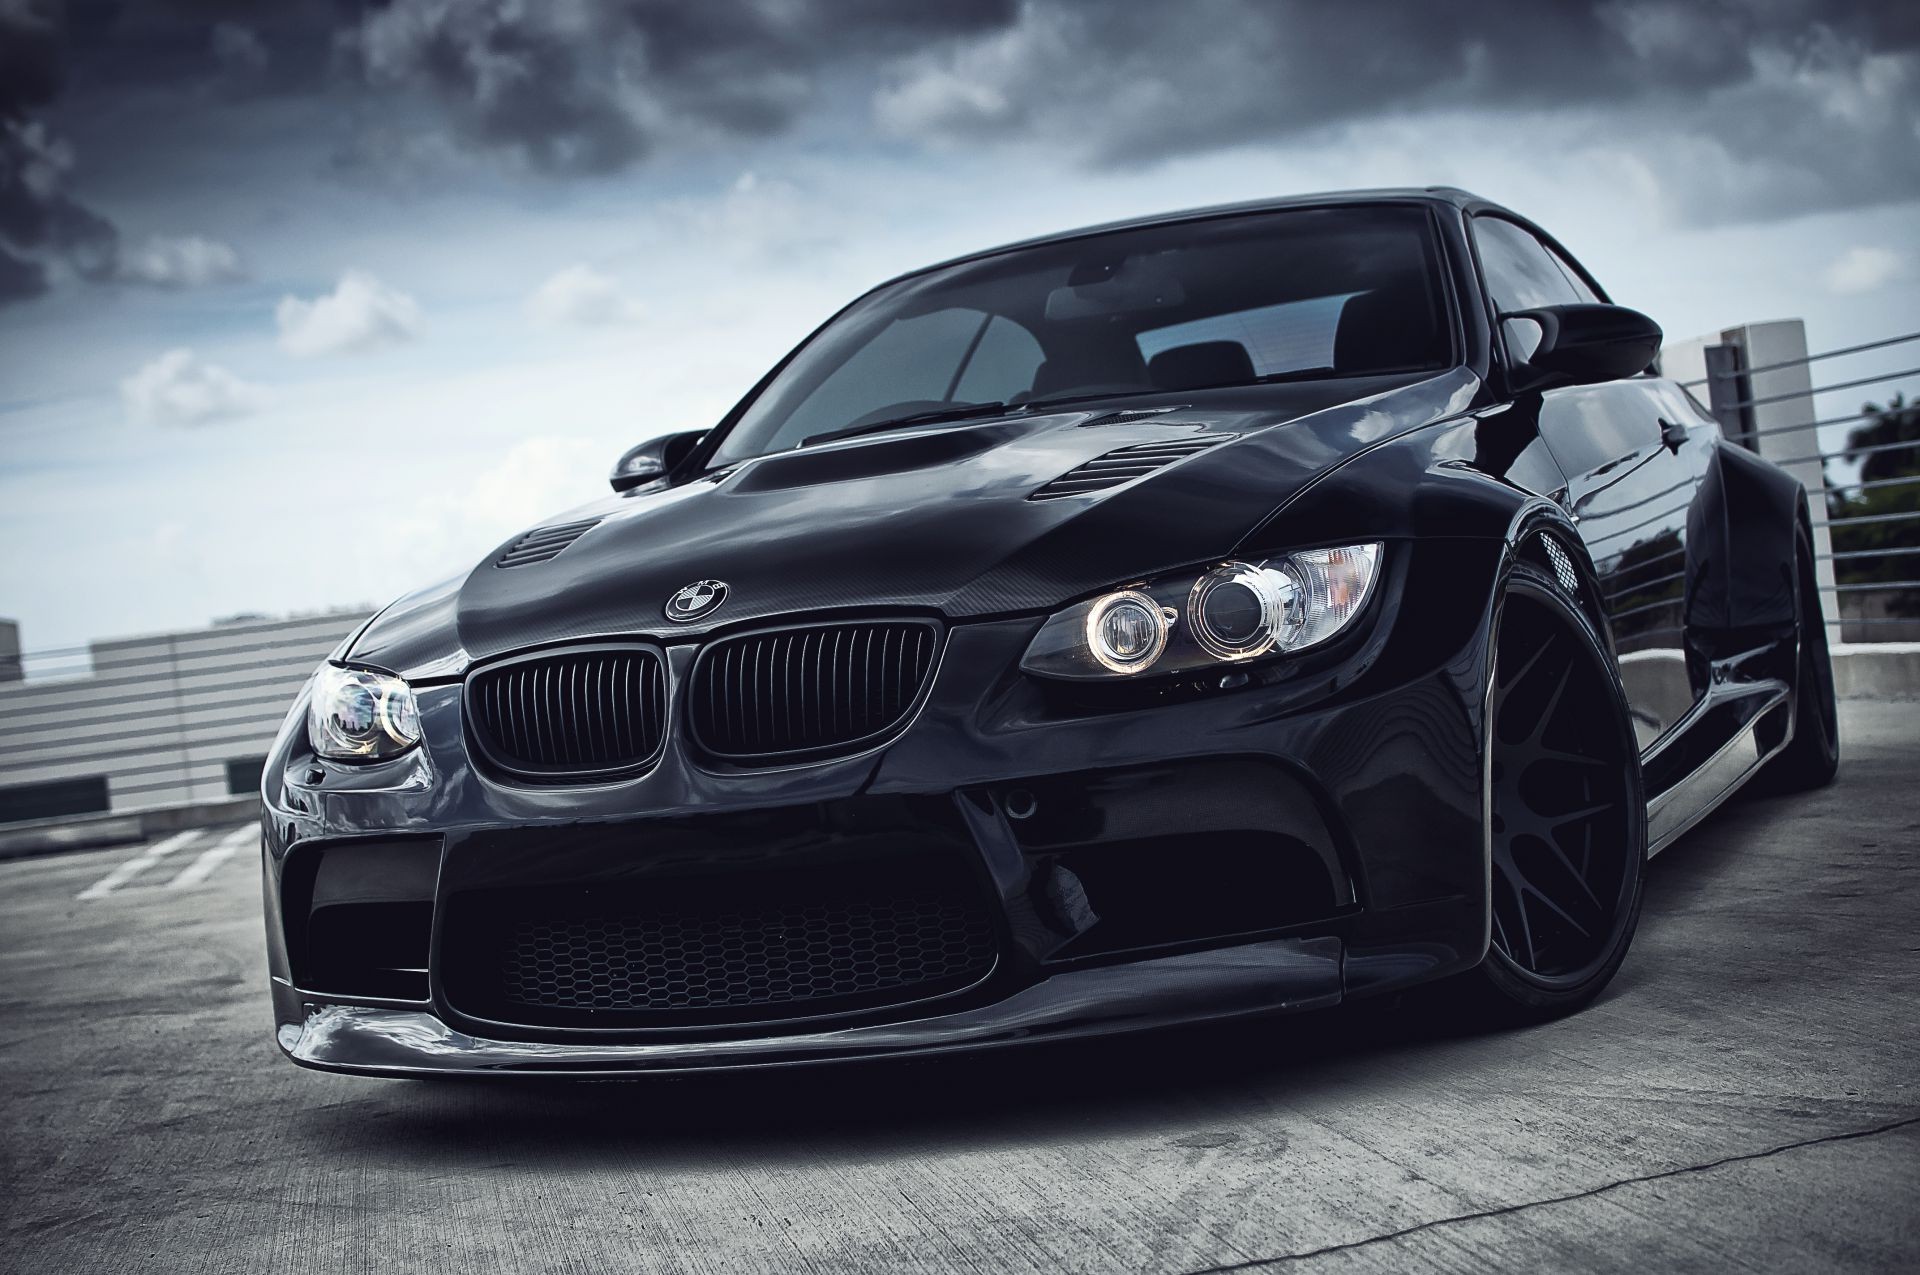 BMW M3 E93 Wallpaper 20 Book Source For Free Download HD, 4K & High Quality Wallpaper